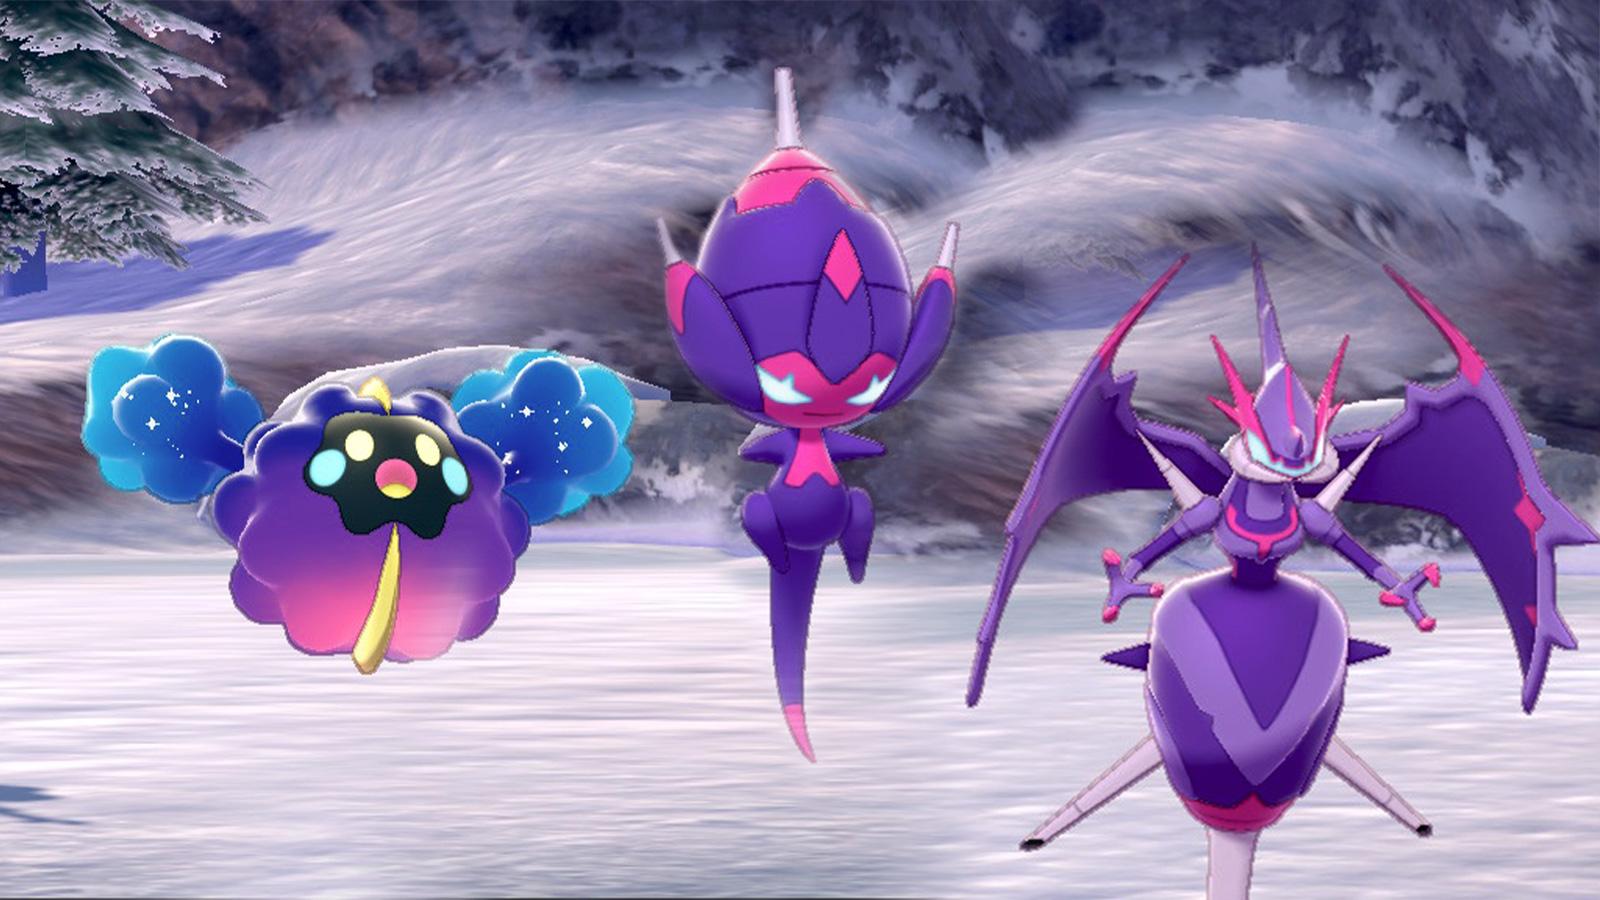 Pokemon Crown Tundra: How To Catch and Find Ultra Beasts - Ultra Beast  Quest Line